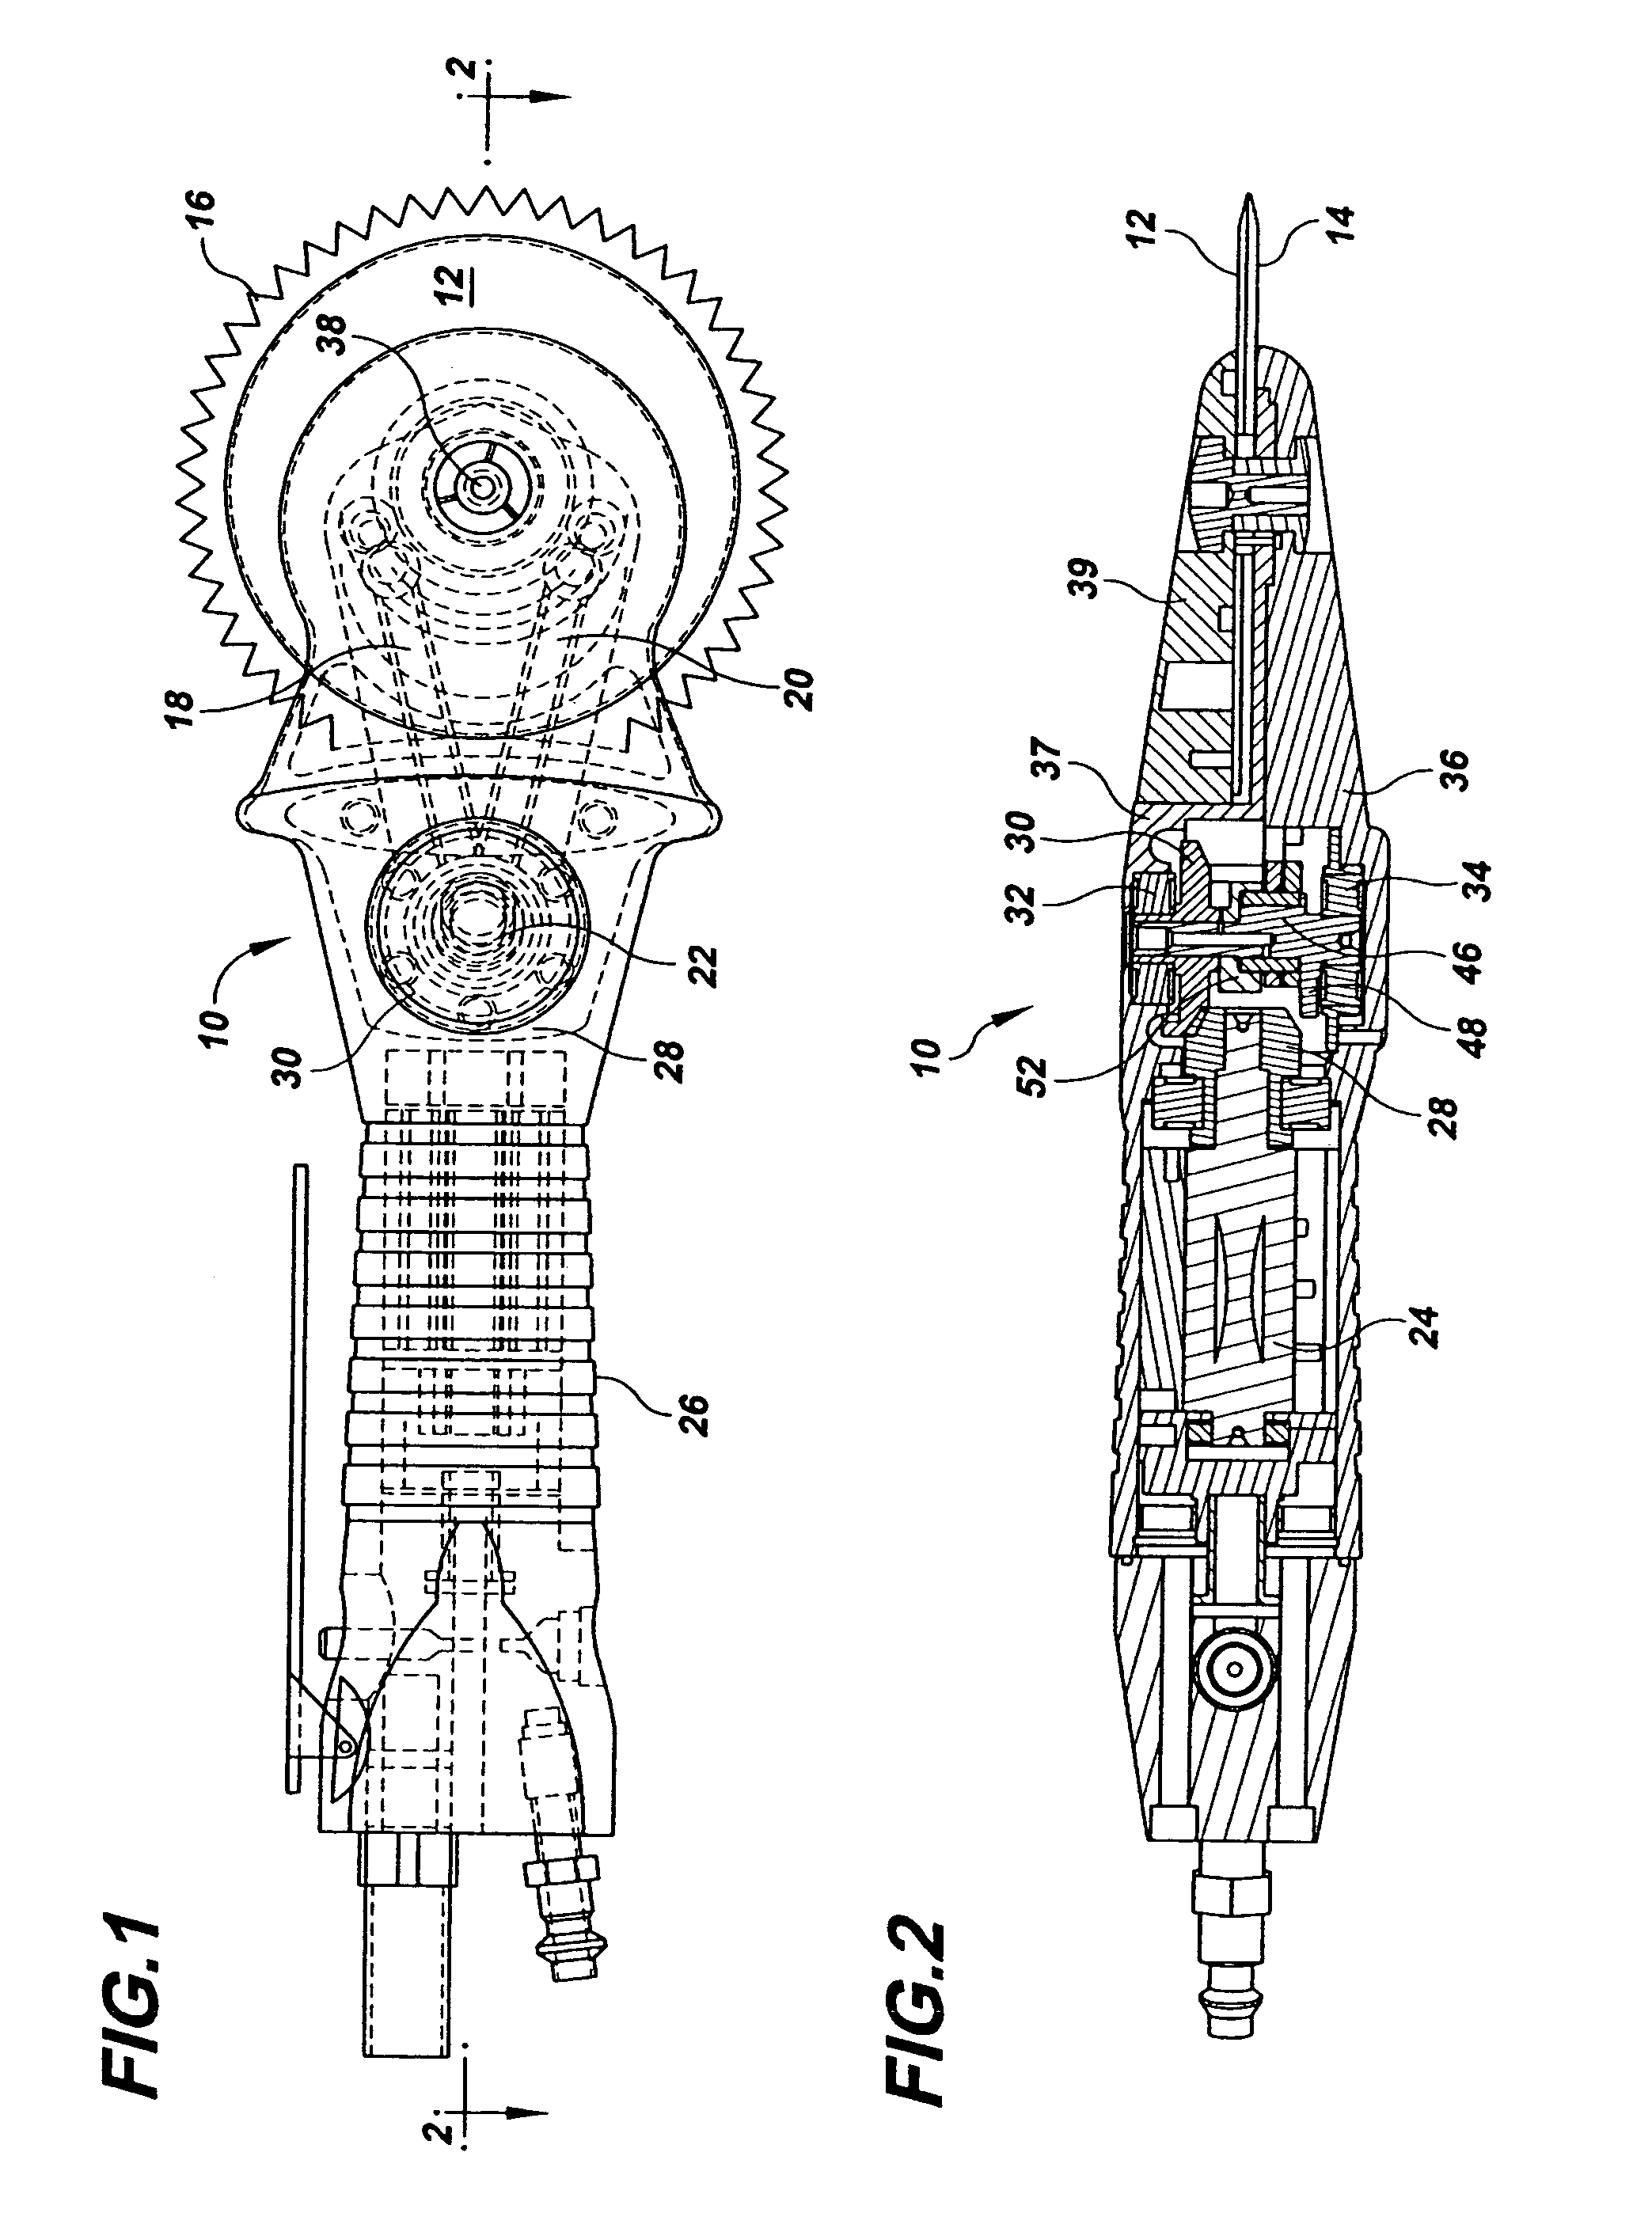 Dehider with dual counterbalance drive system